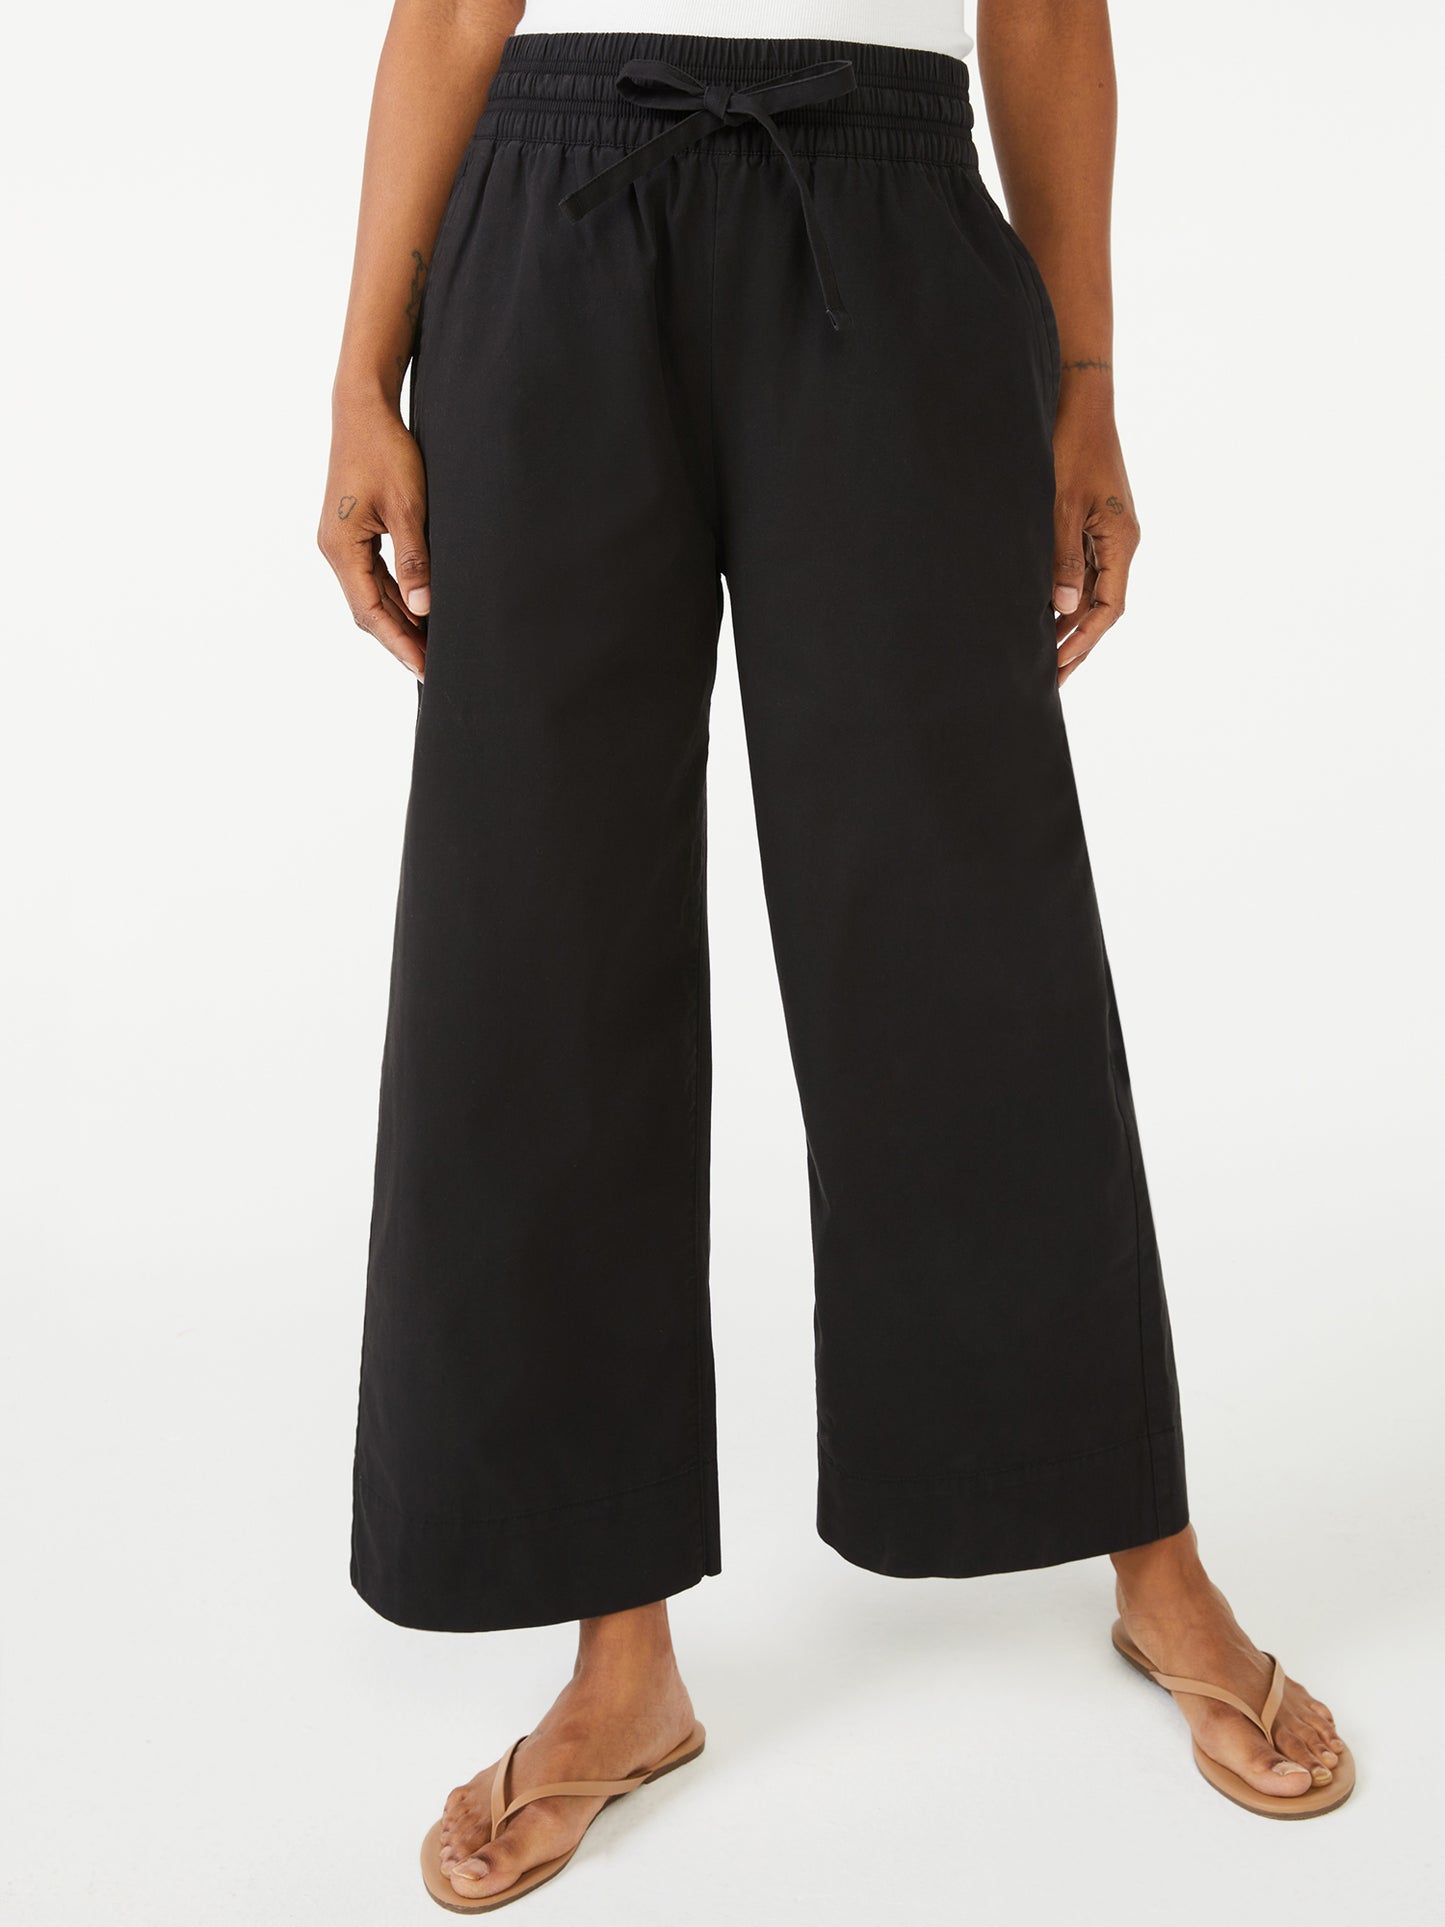 Free Assembly Womens Wide-Leg Pull-On Pants